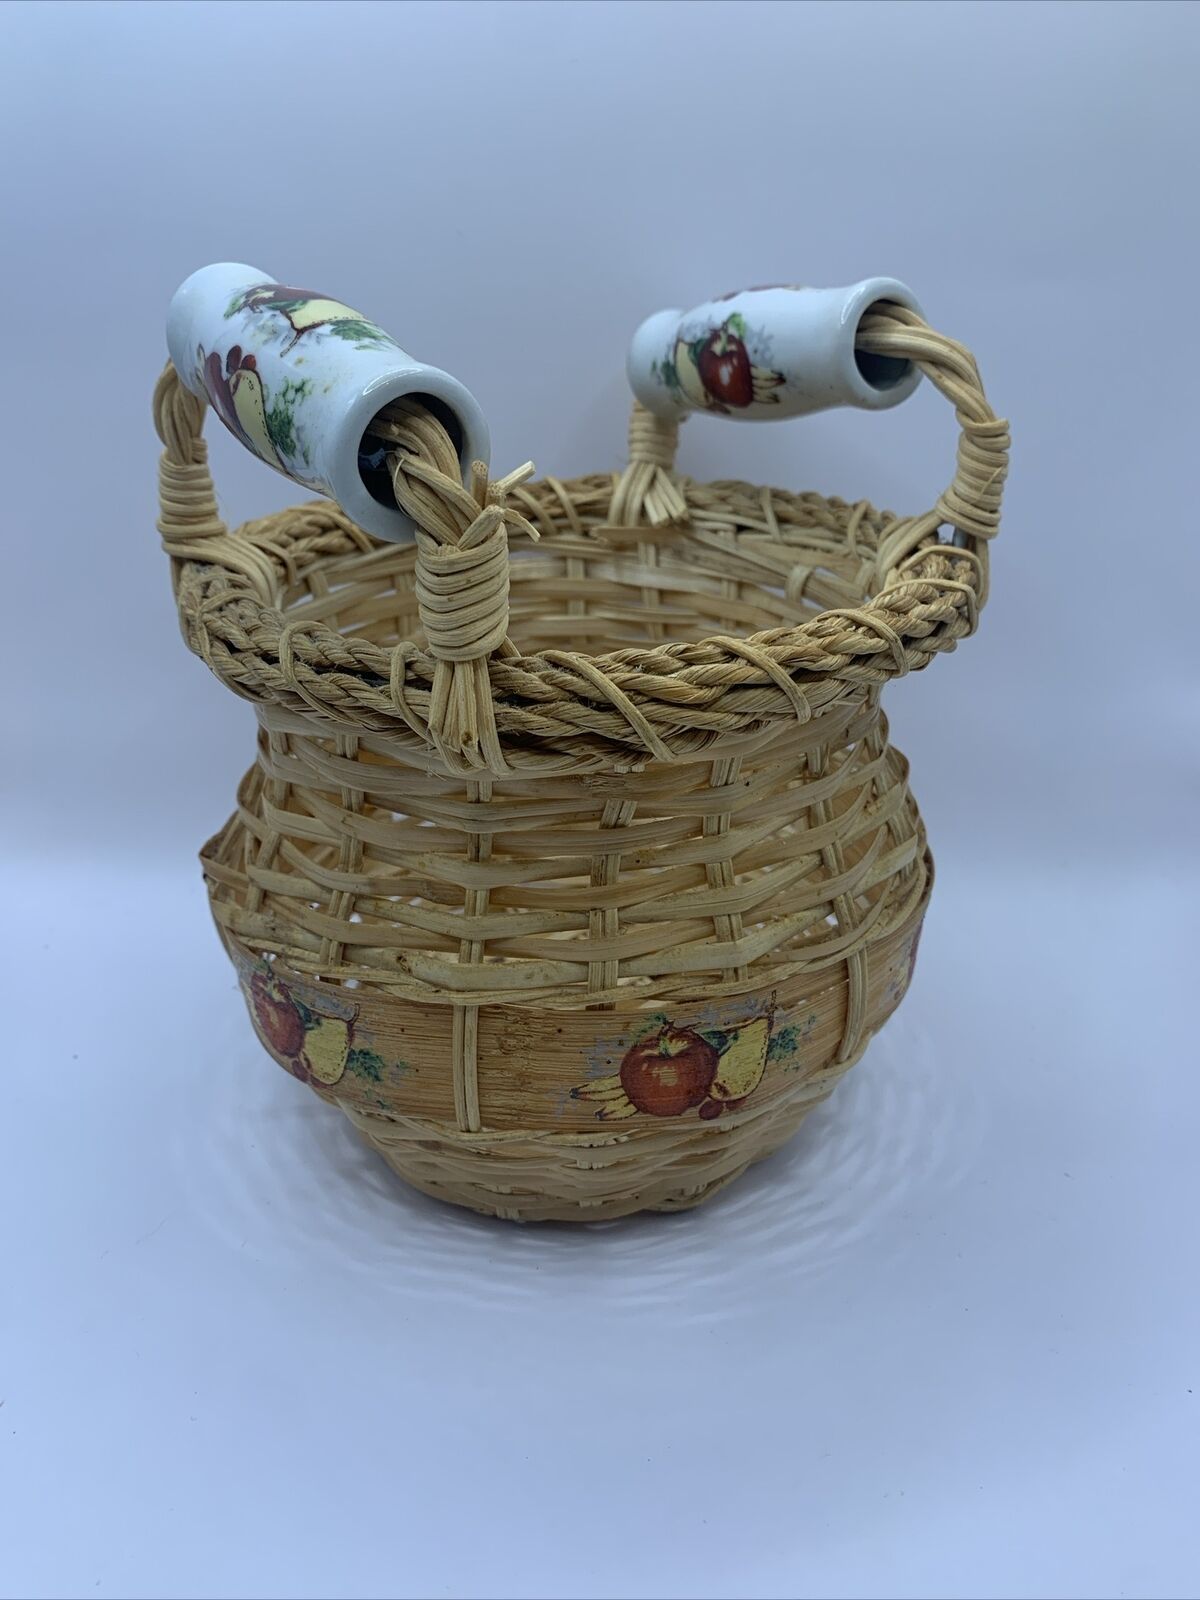 Woven Small Round Wicker Basket With Fruit Design & Ceramic Handles 7” Tall